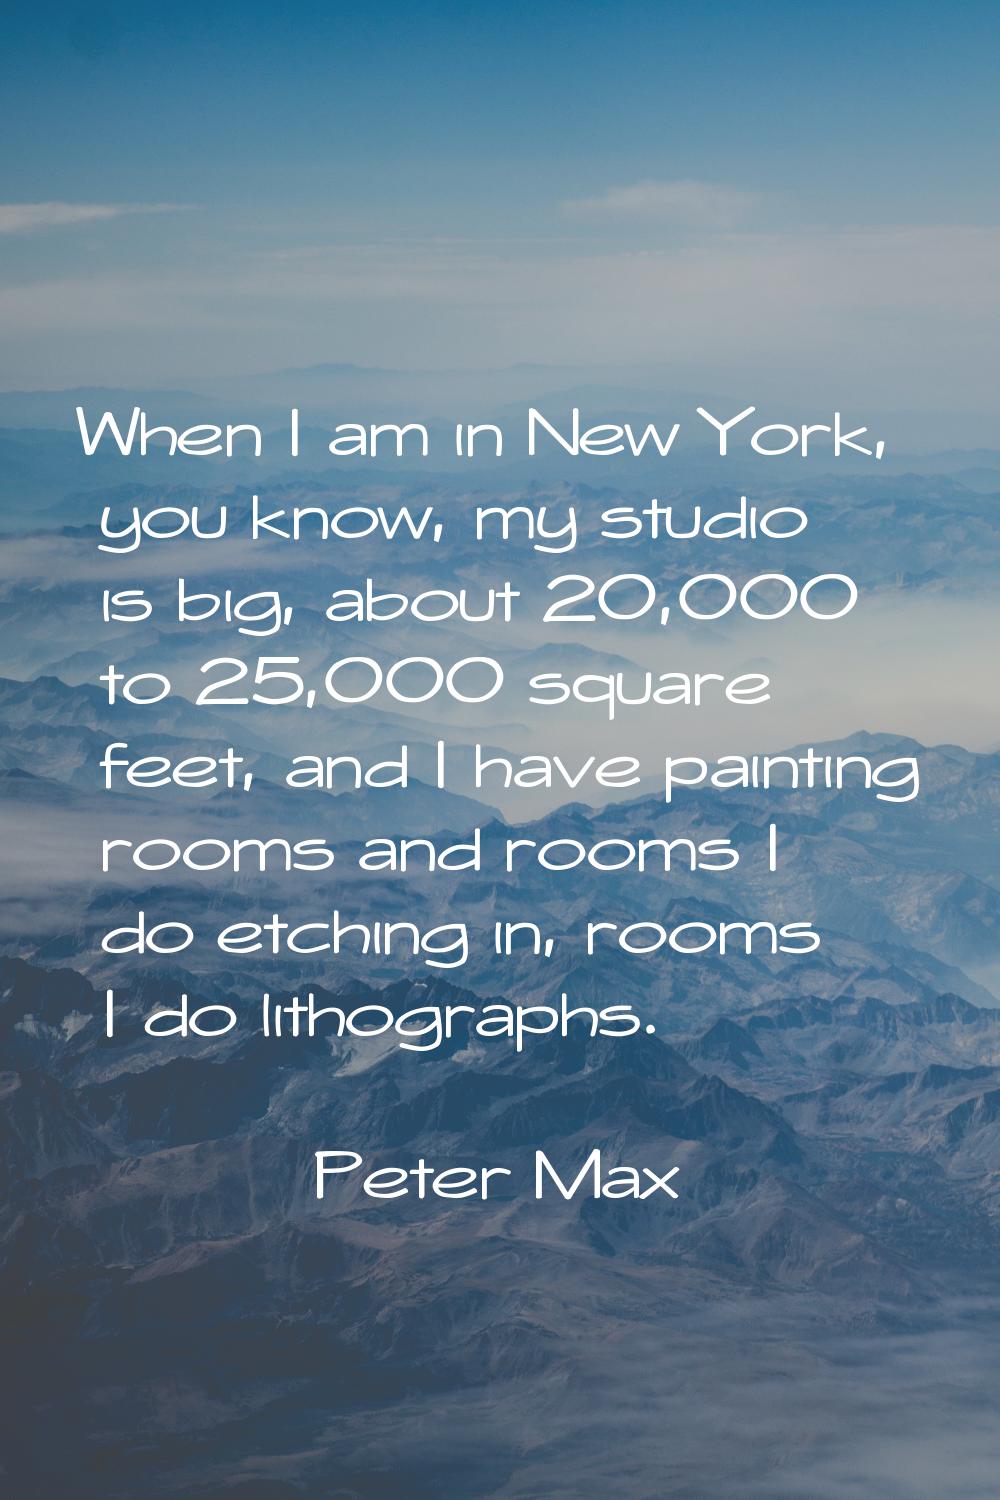 When I am in New York, you know, my studio is big, about 20,000 to 25,000 square feet, and I have p